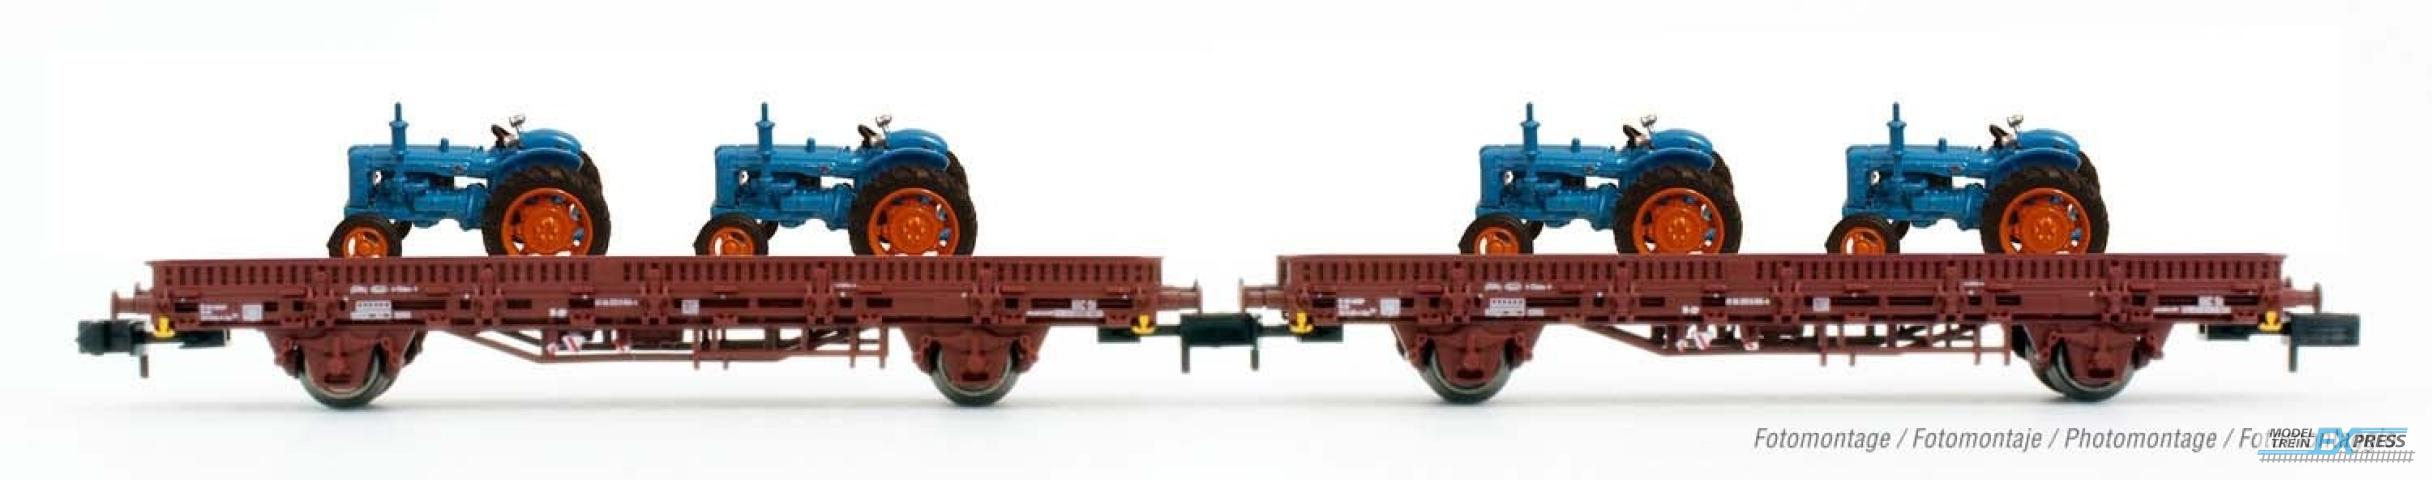 Arnold 6489 FS, 2-unit pack PP (Ks) wagons, loaded with 4 blue tractors, period III-IV